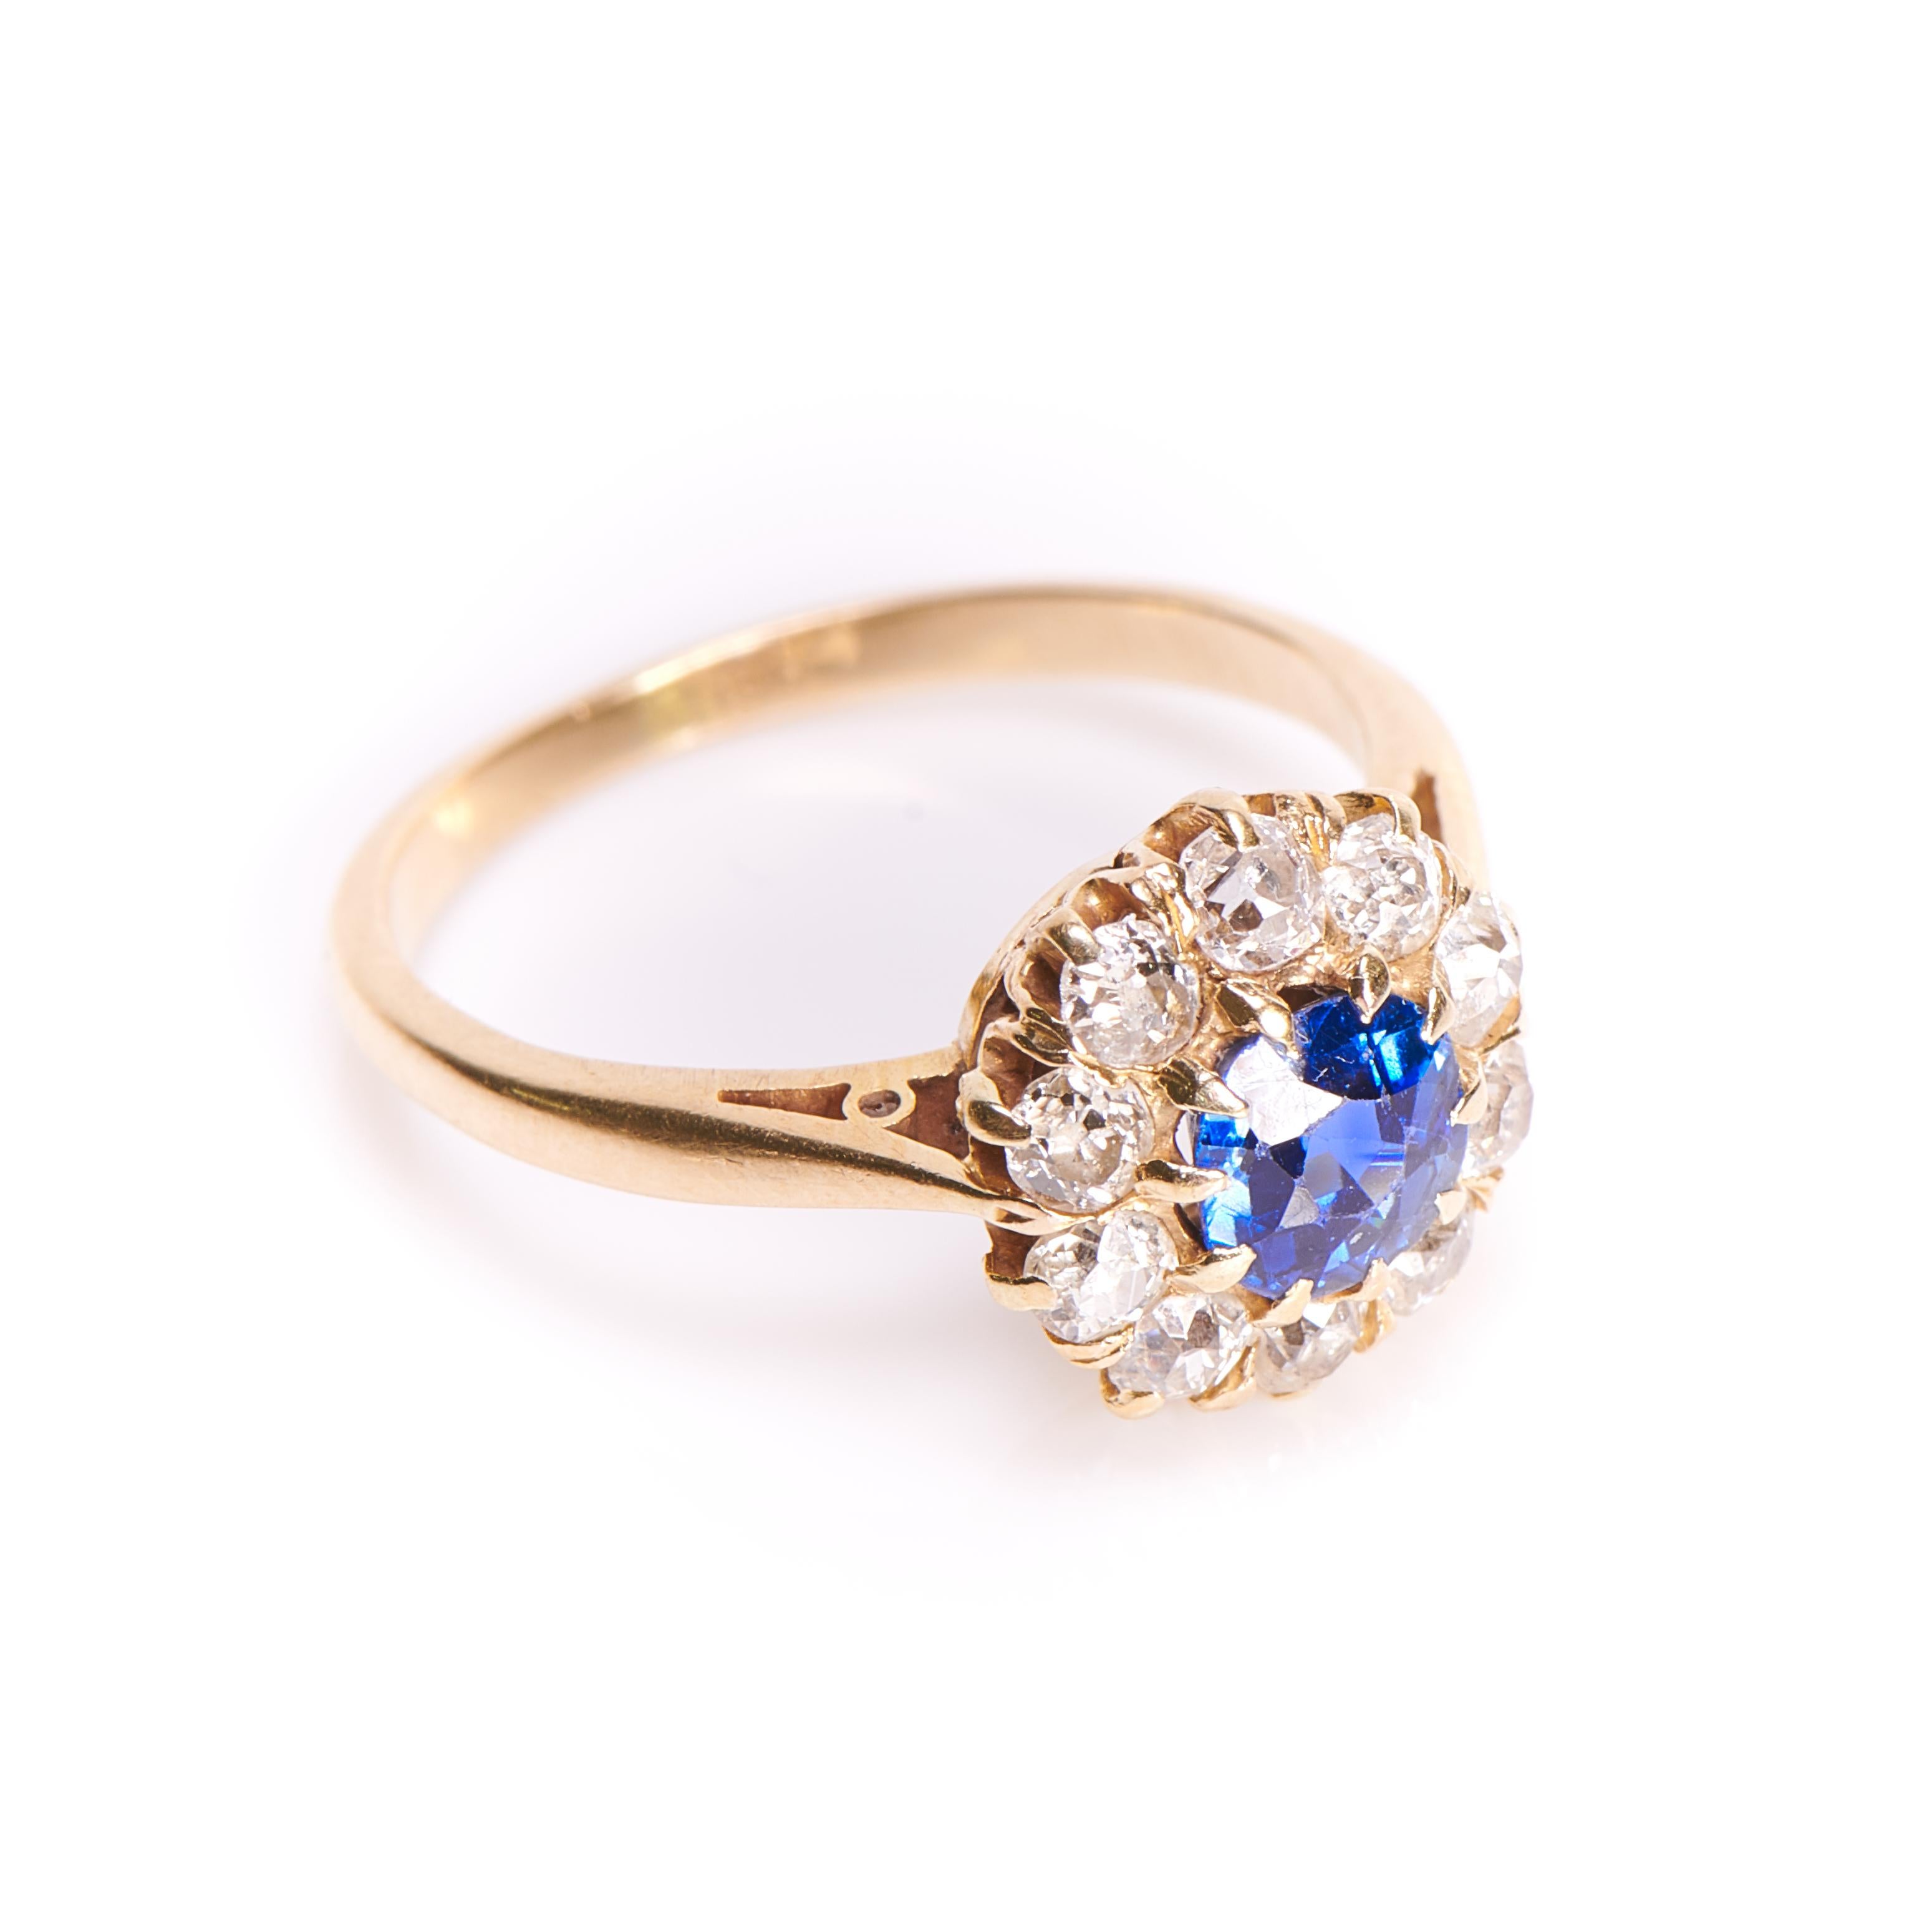 Round Cut Antique, Edwardian, 18 Carat Gold Sapphire and Diamond Engagement Ring